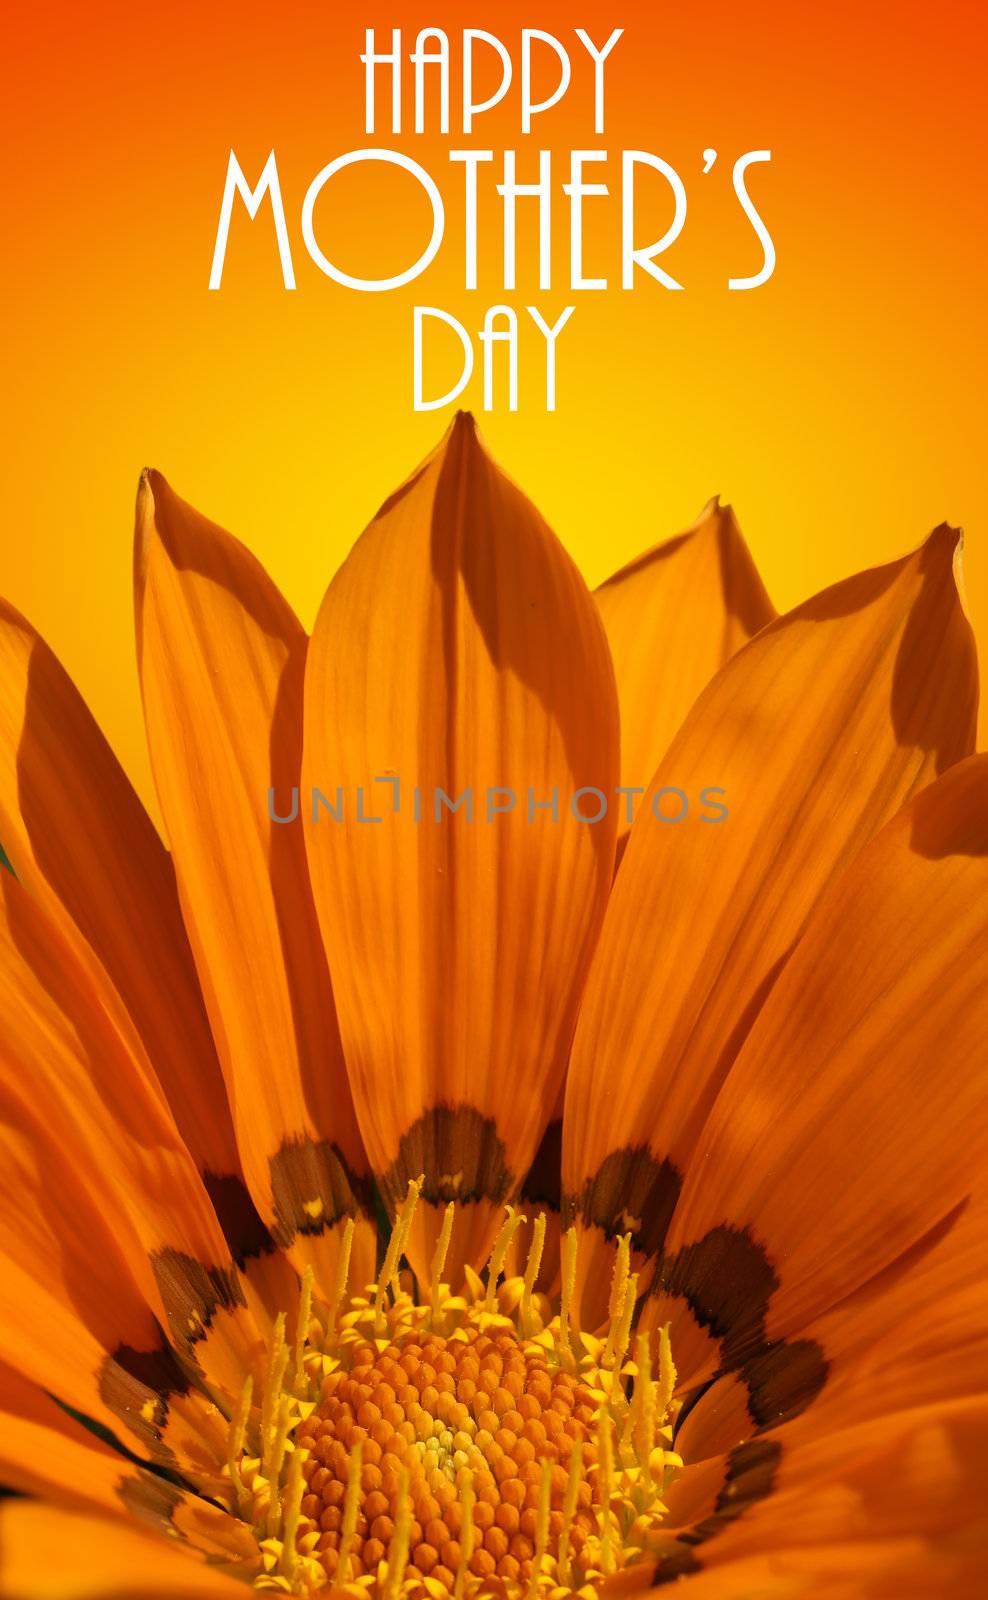 Mothers day card with orange flower  by Mirage3